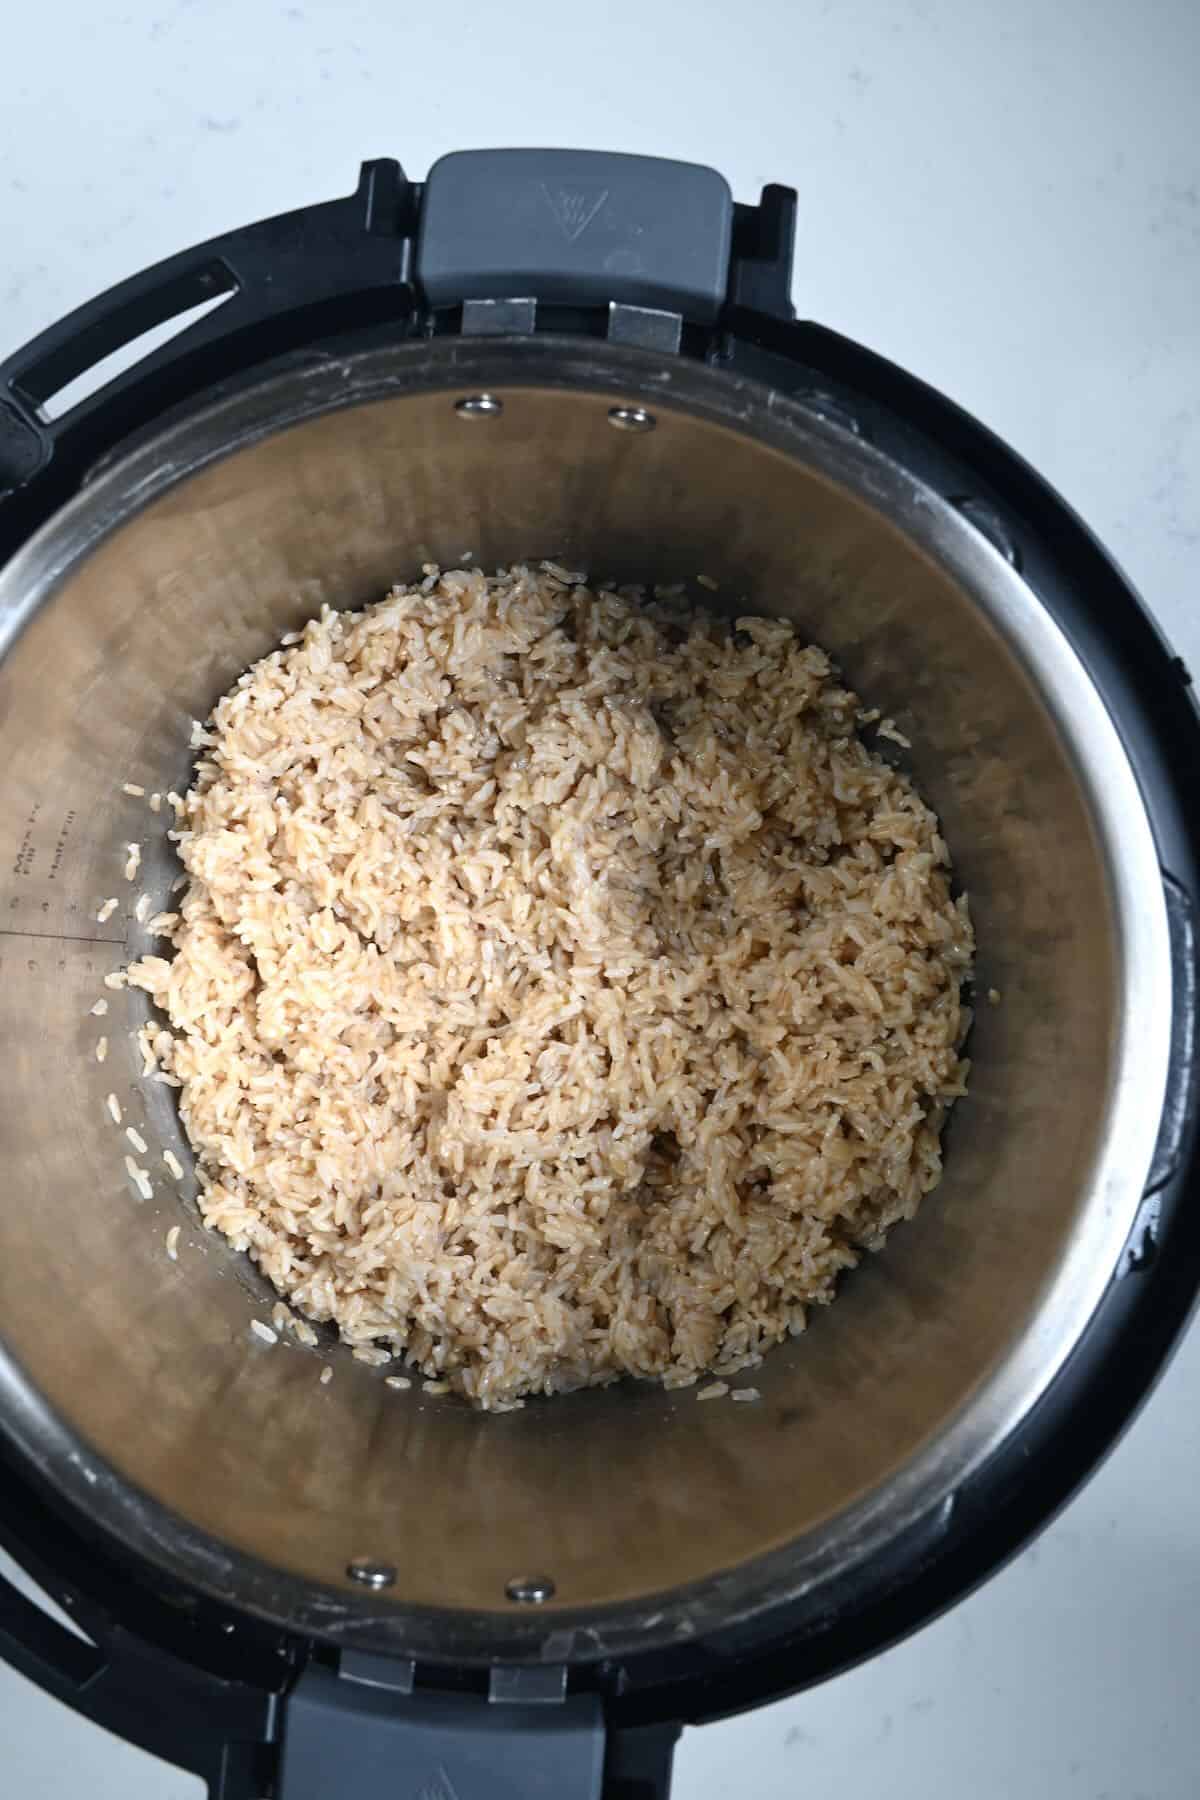 Cooked rice in an instant pot